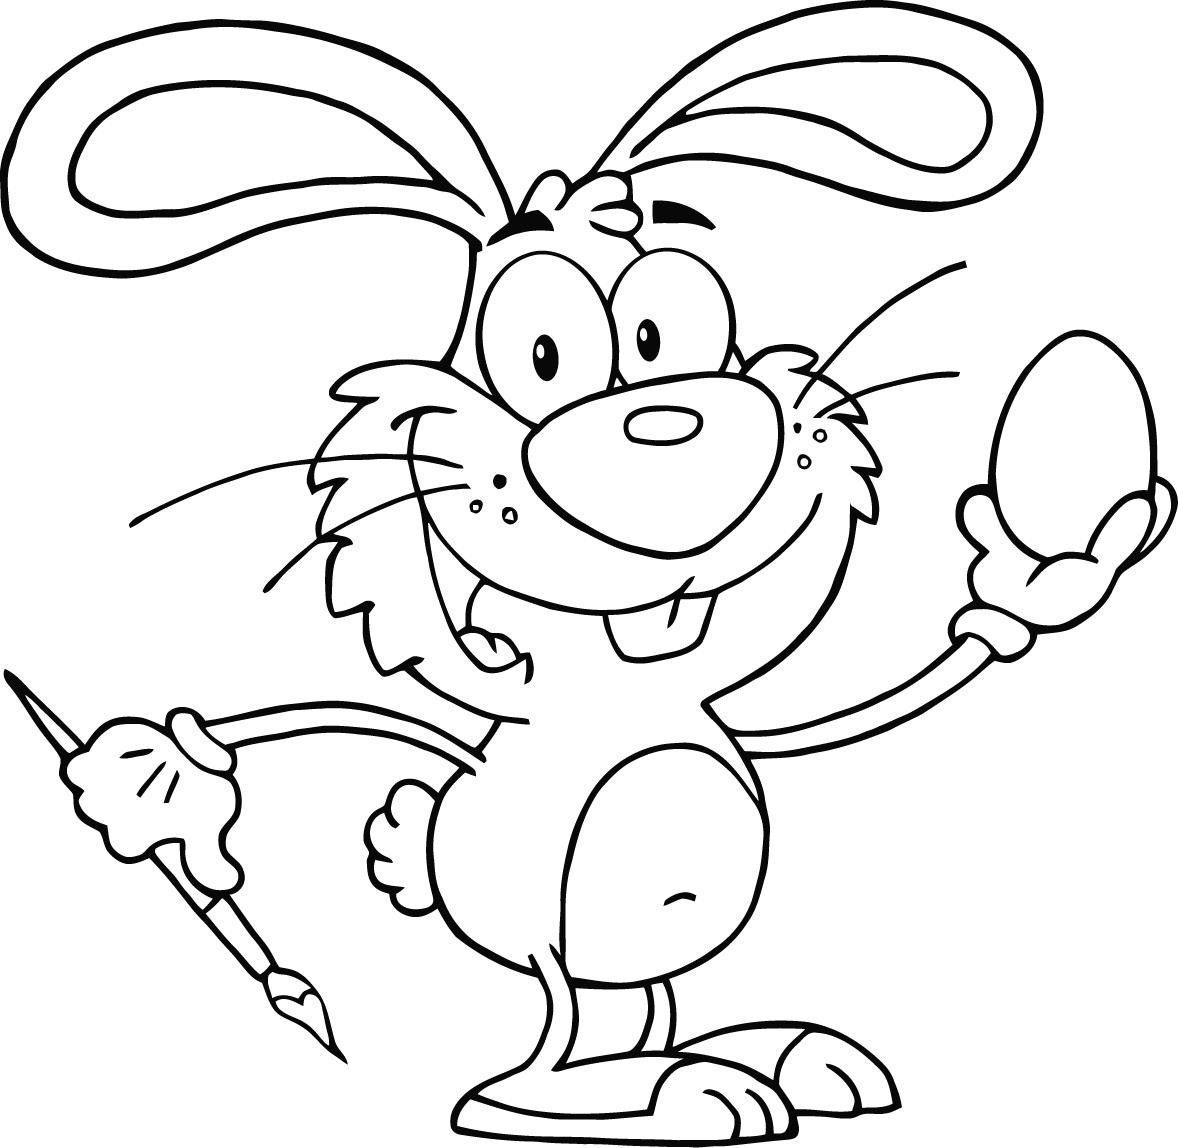 Bunny Coloring Pages
 Bunny Coloring Pages Best Coloring Pages For Kids